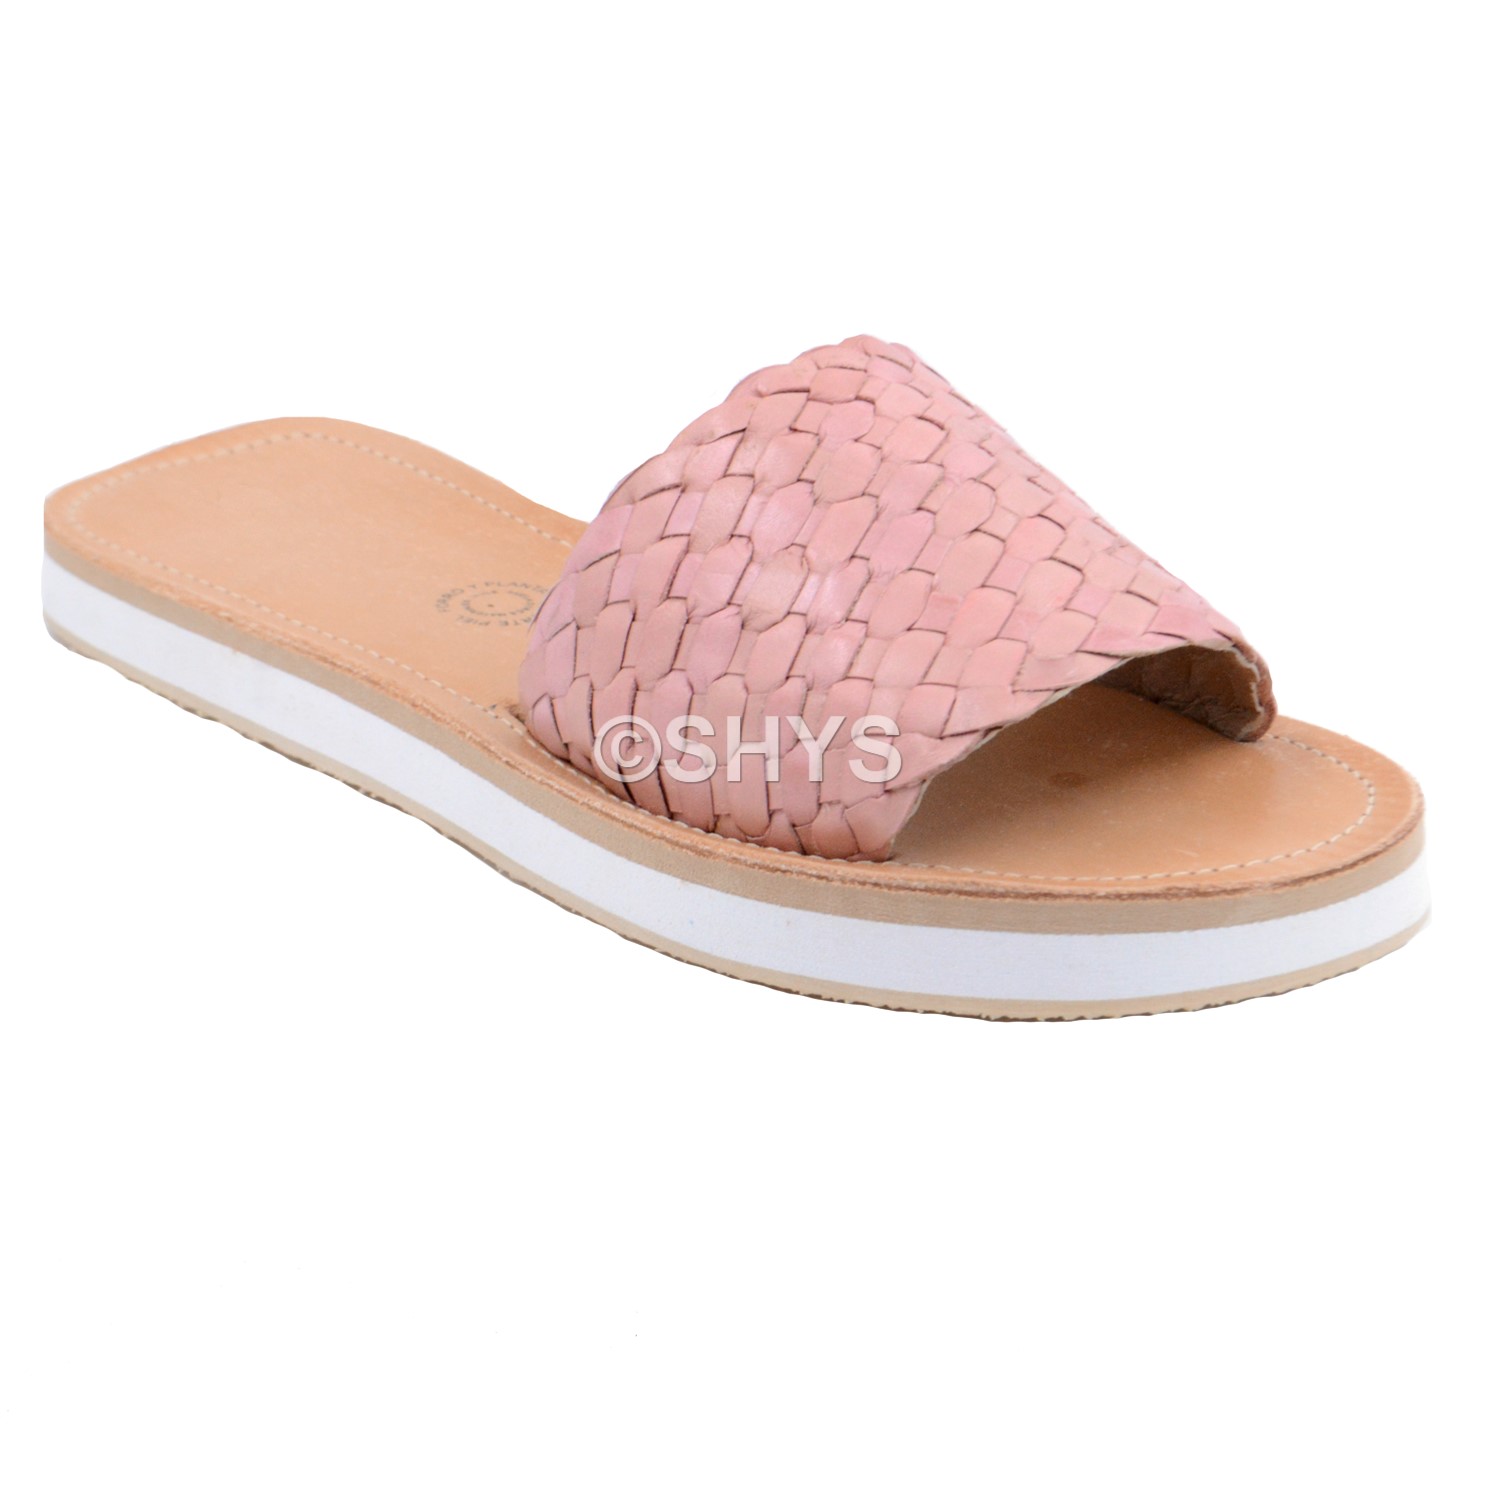 Leather Mexican Sandals For Woman Huaraches Rosa Dds-139